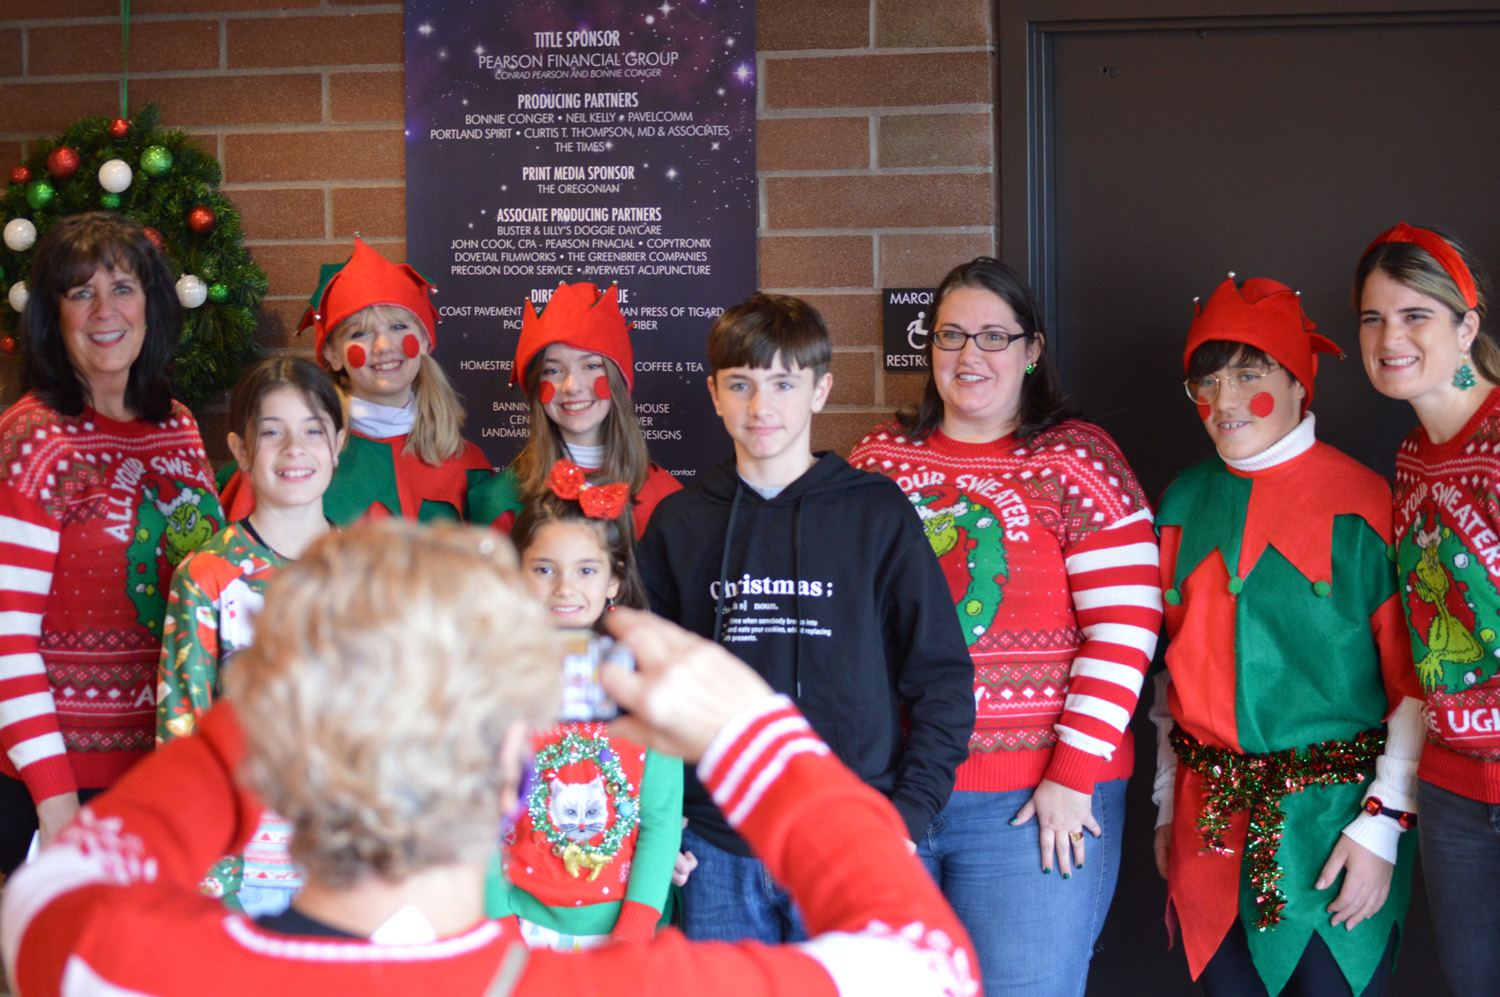 A family posing with Santa's helpers in the lobby.